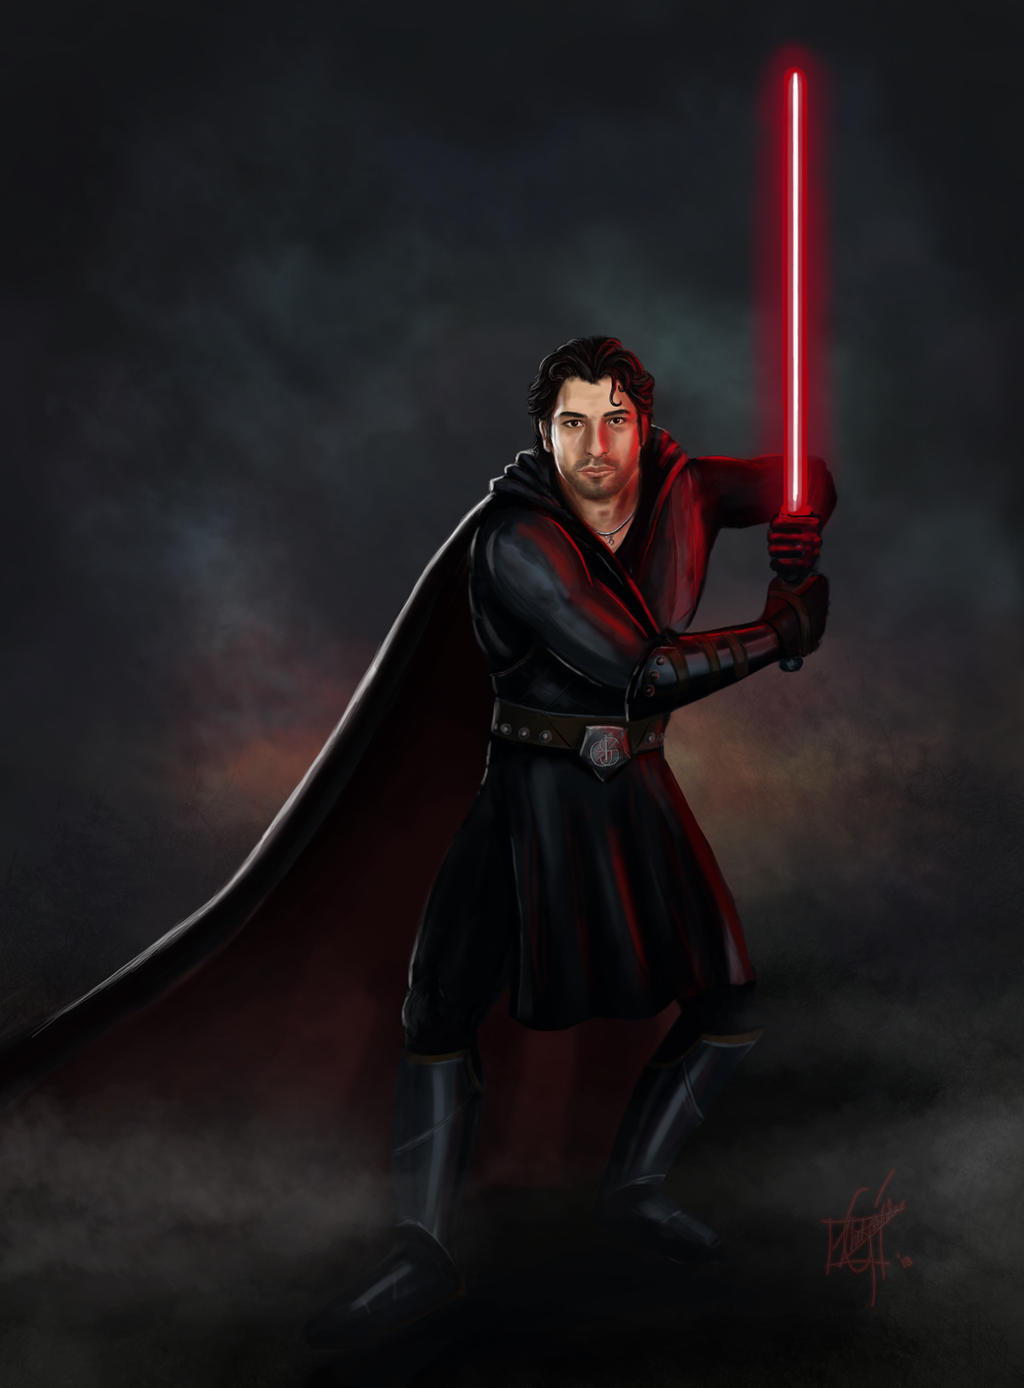 sith_lord_by_gs_arts-d5r0wxd.jpg